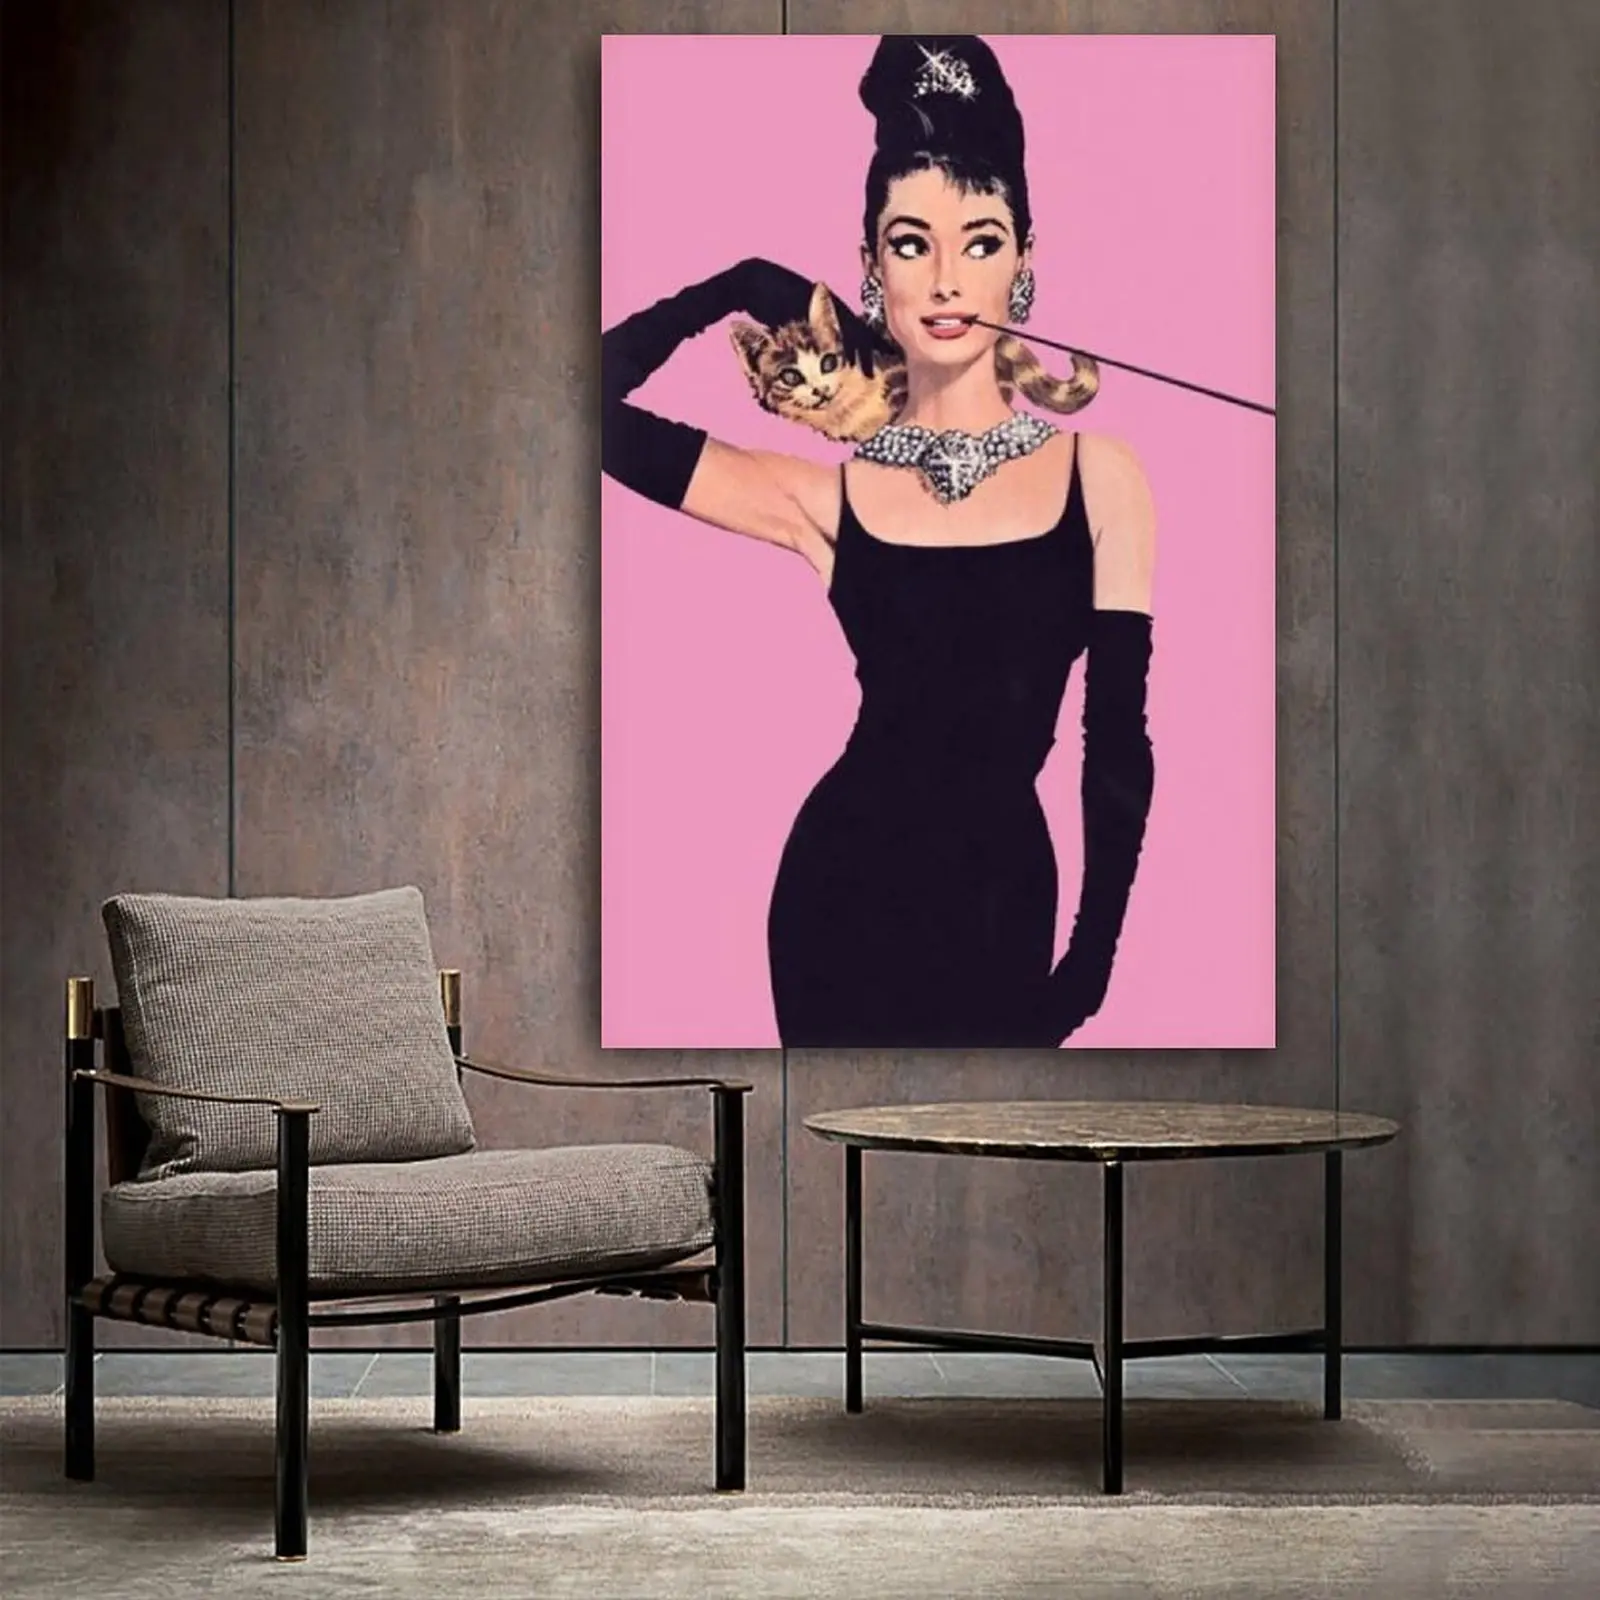 

Audrey Hepburn Breakfast at Tiffanys Pink Movie Print on Canvas Painting Wall Art for Living Room Home Decor Boy Gift